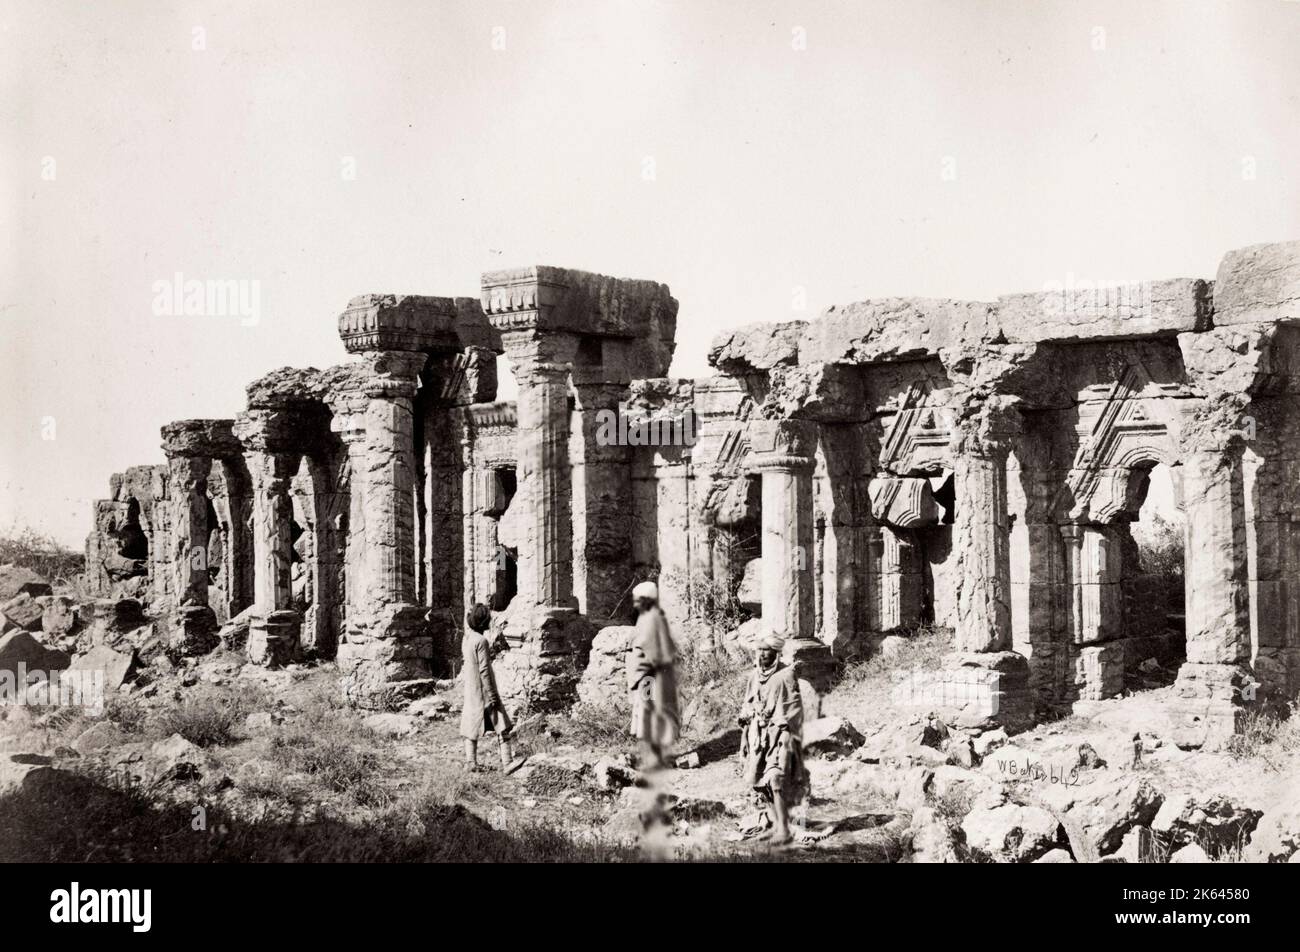 Vintage 19th century photograph: Martand Sun Temple. Now in ruins, the temple is located five miles from Anantnag in the Indian union territory of Jammu and Kashmir. Stock Photo